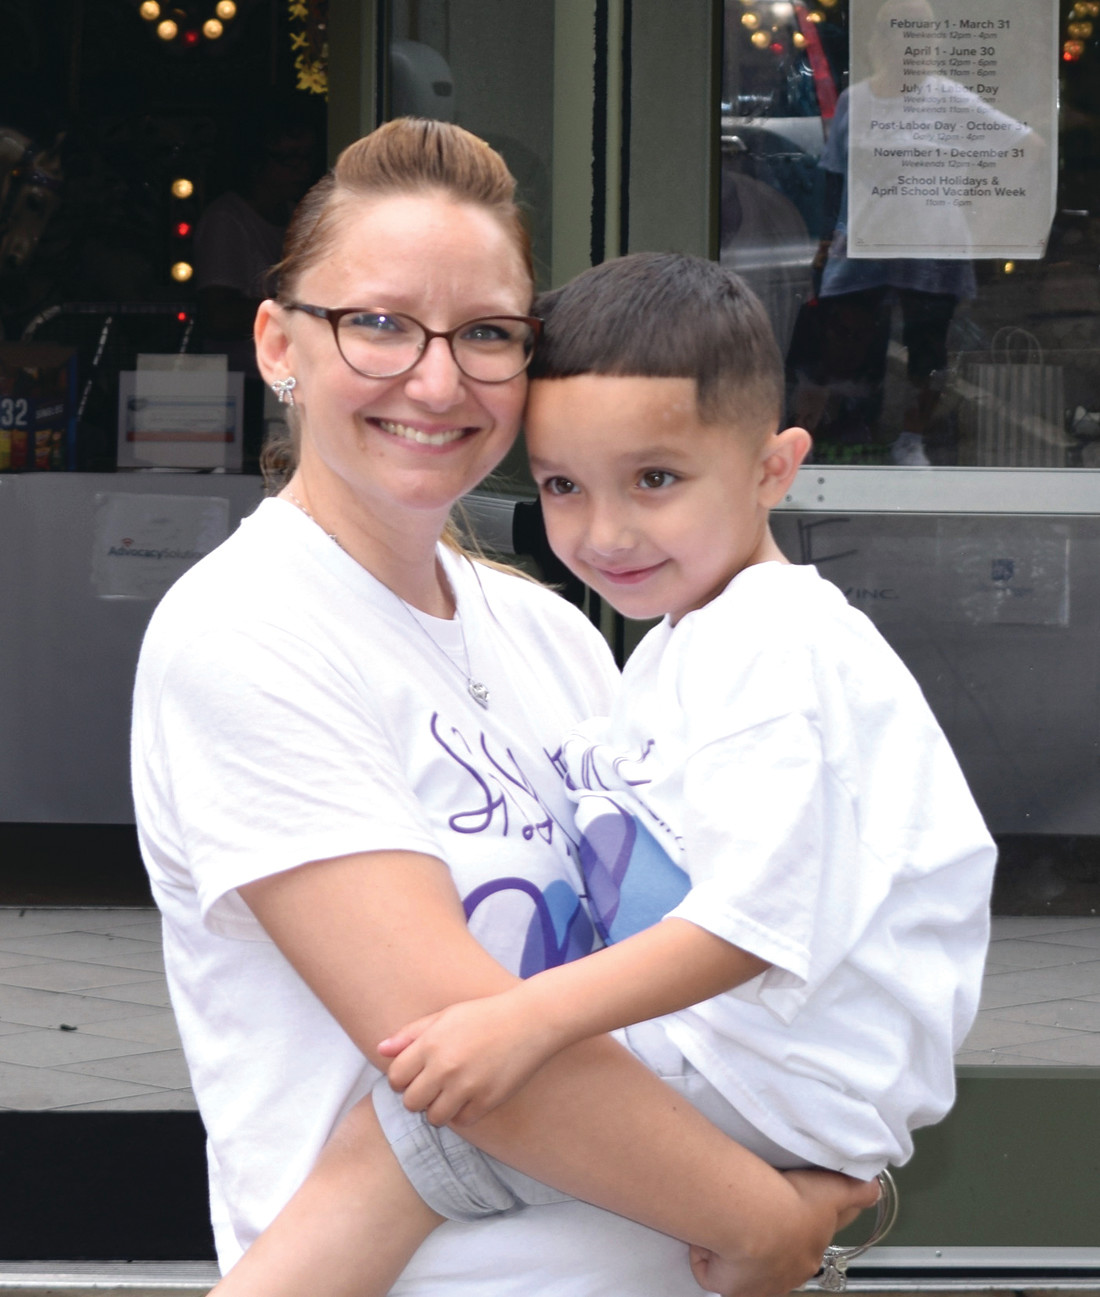 PROUD MOTHER: Nicole White and her son Kyrie were photographed last summer at the first ever Short Bowel Syndrome Foundation for Children of New England 5k, which she helped to organize and was held at Roger Williams Park.